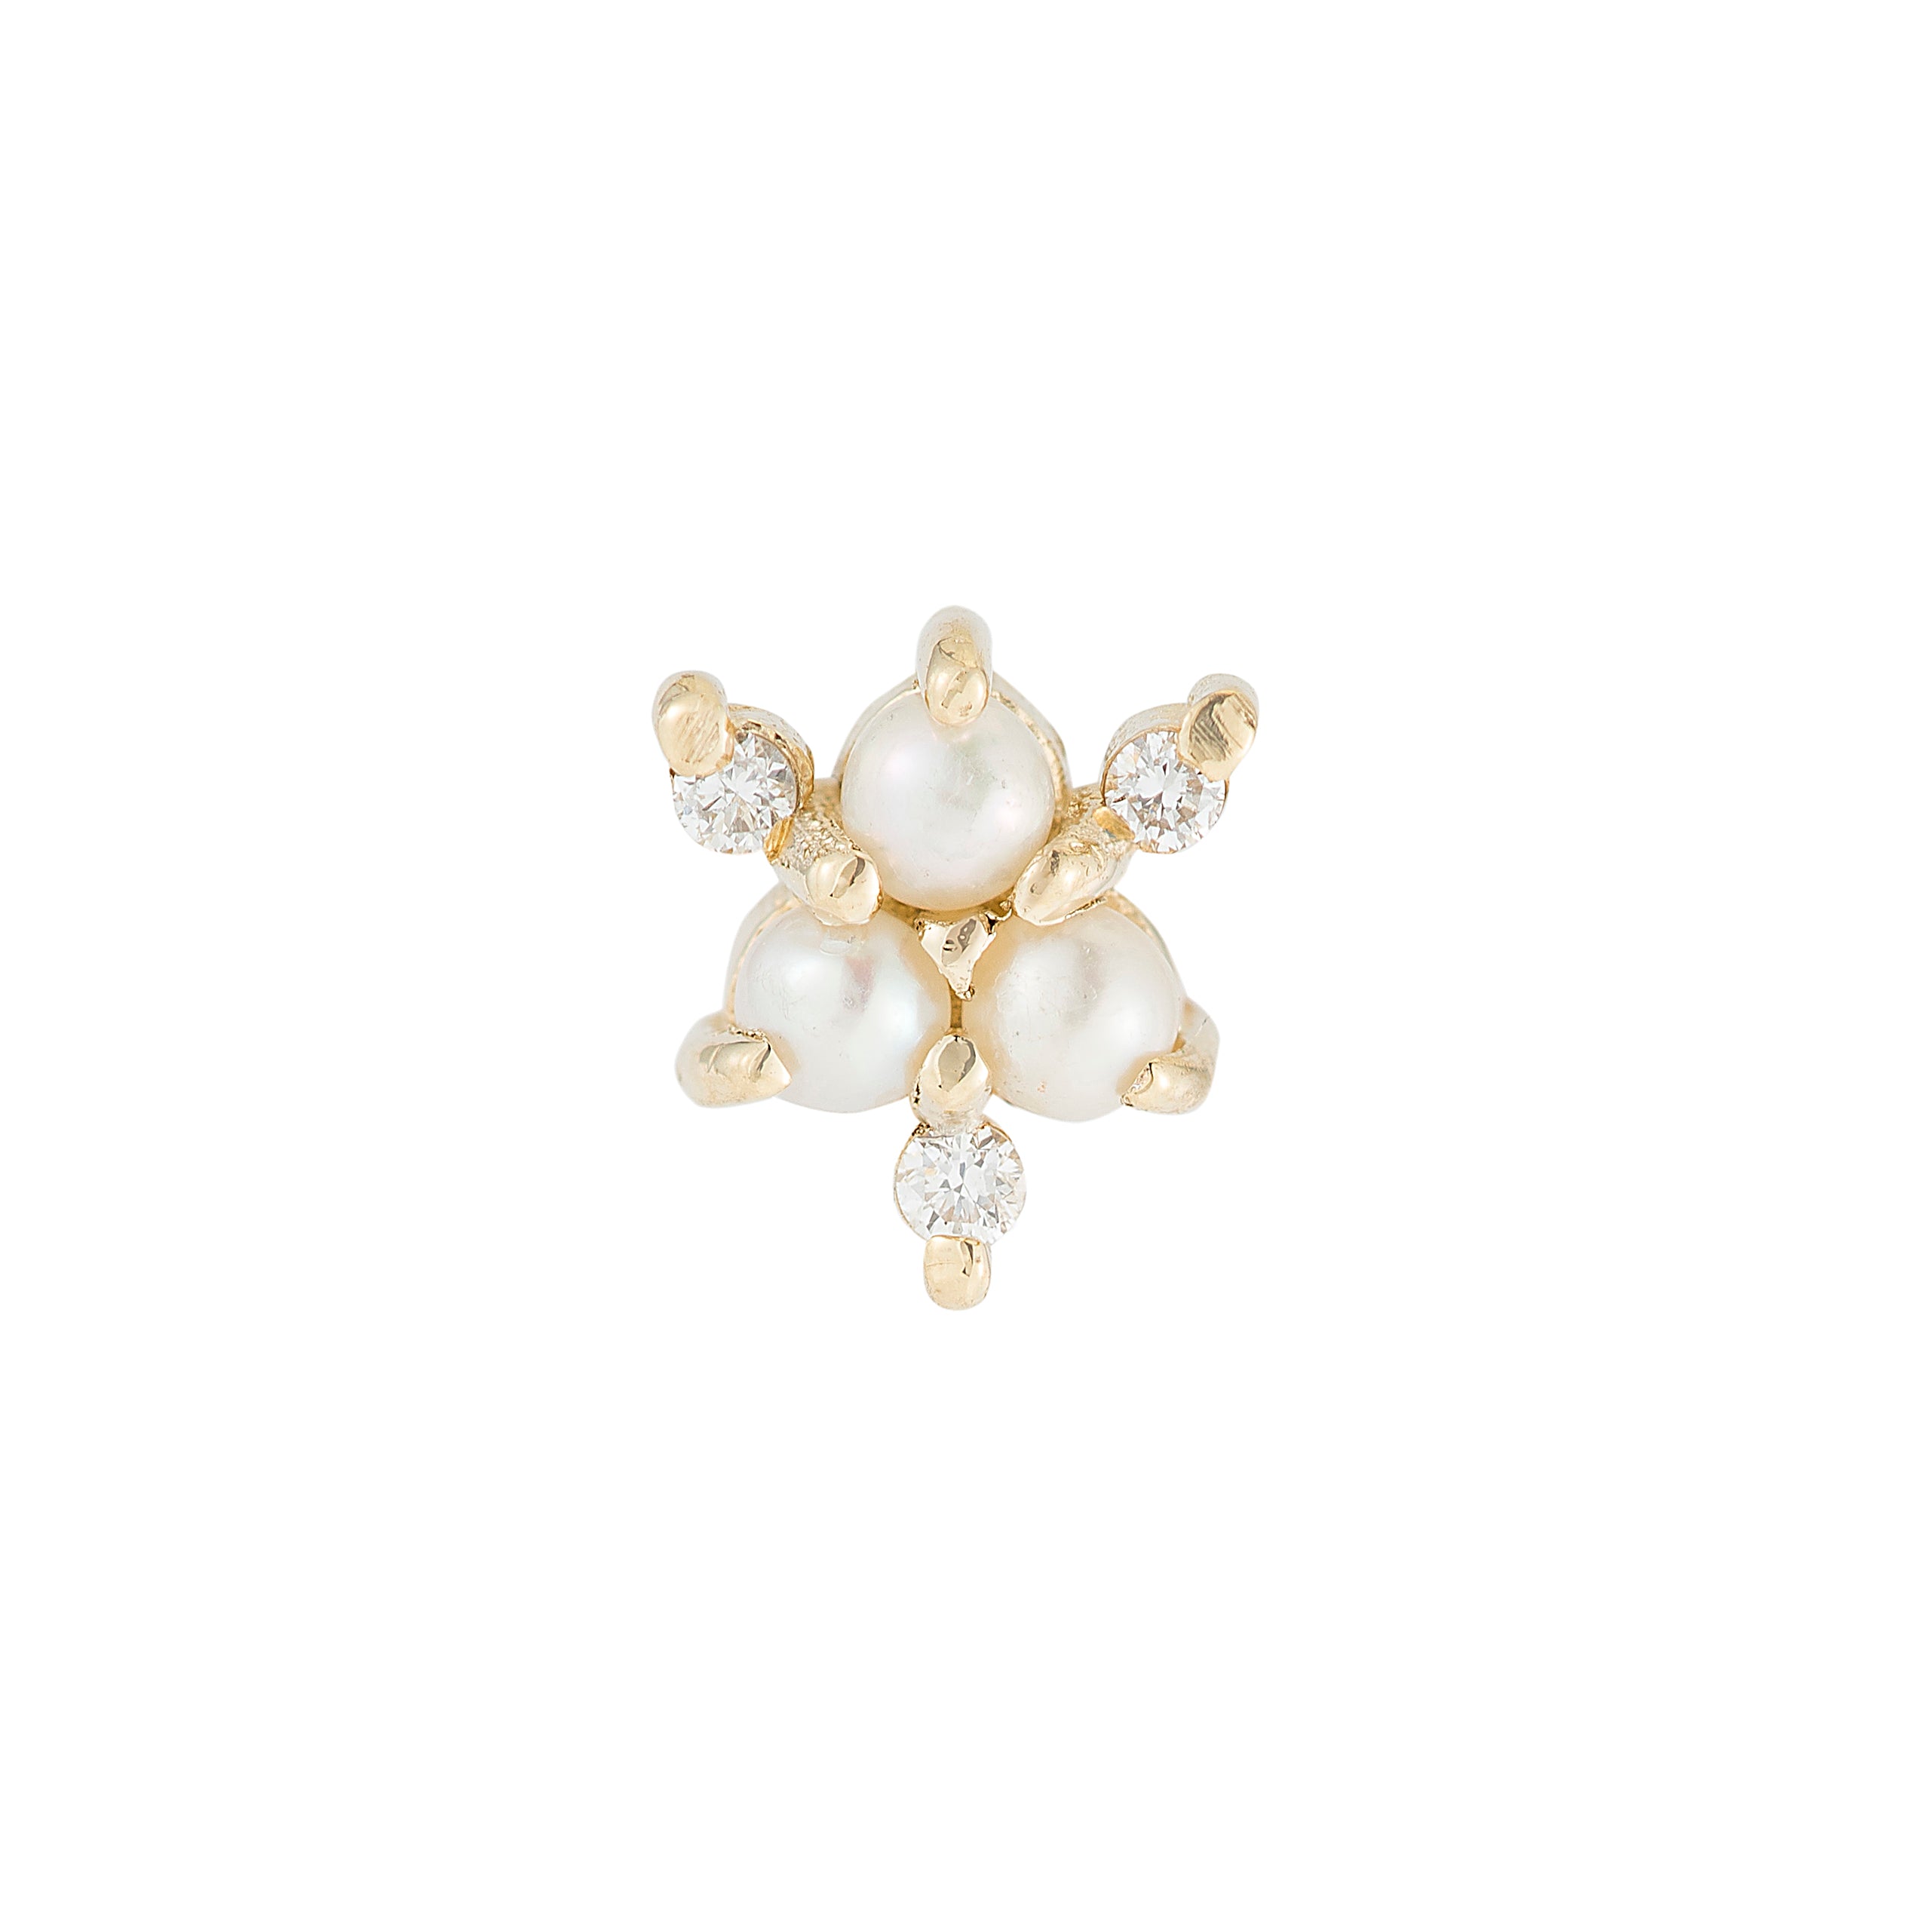 Snowflake Shape Earring made of 14K Yellow Gold, Pearls and Diamonds.